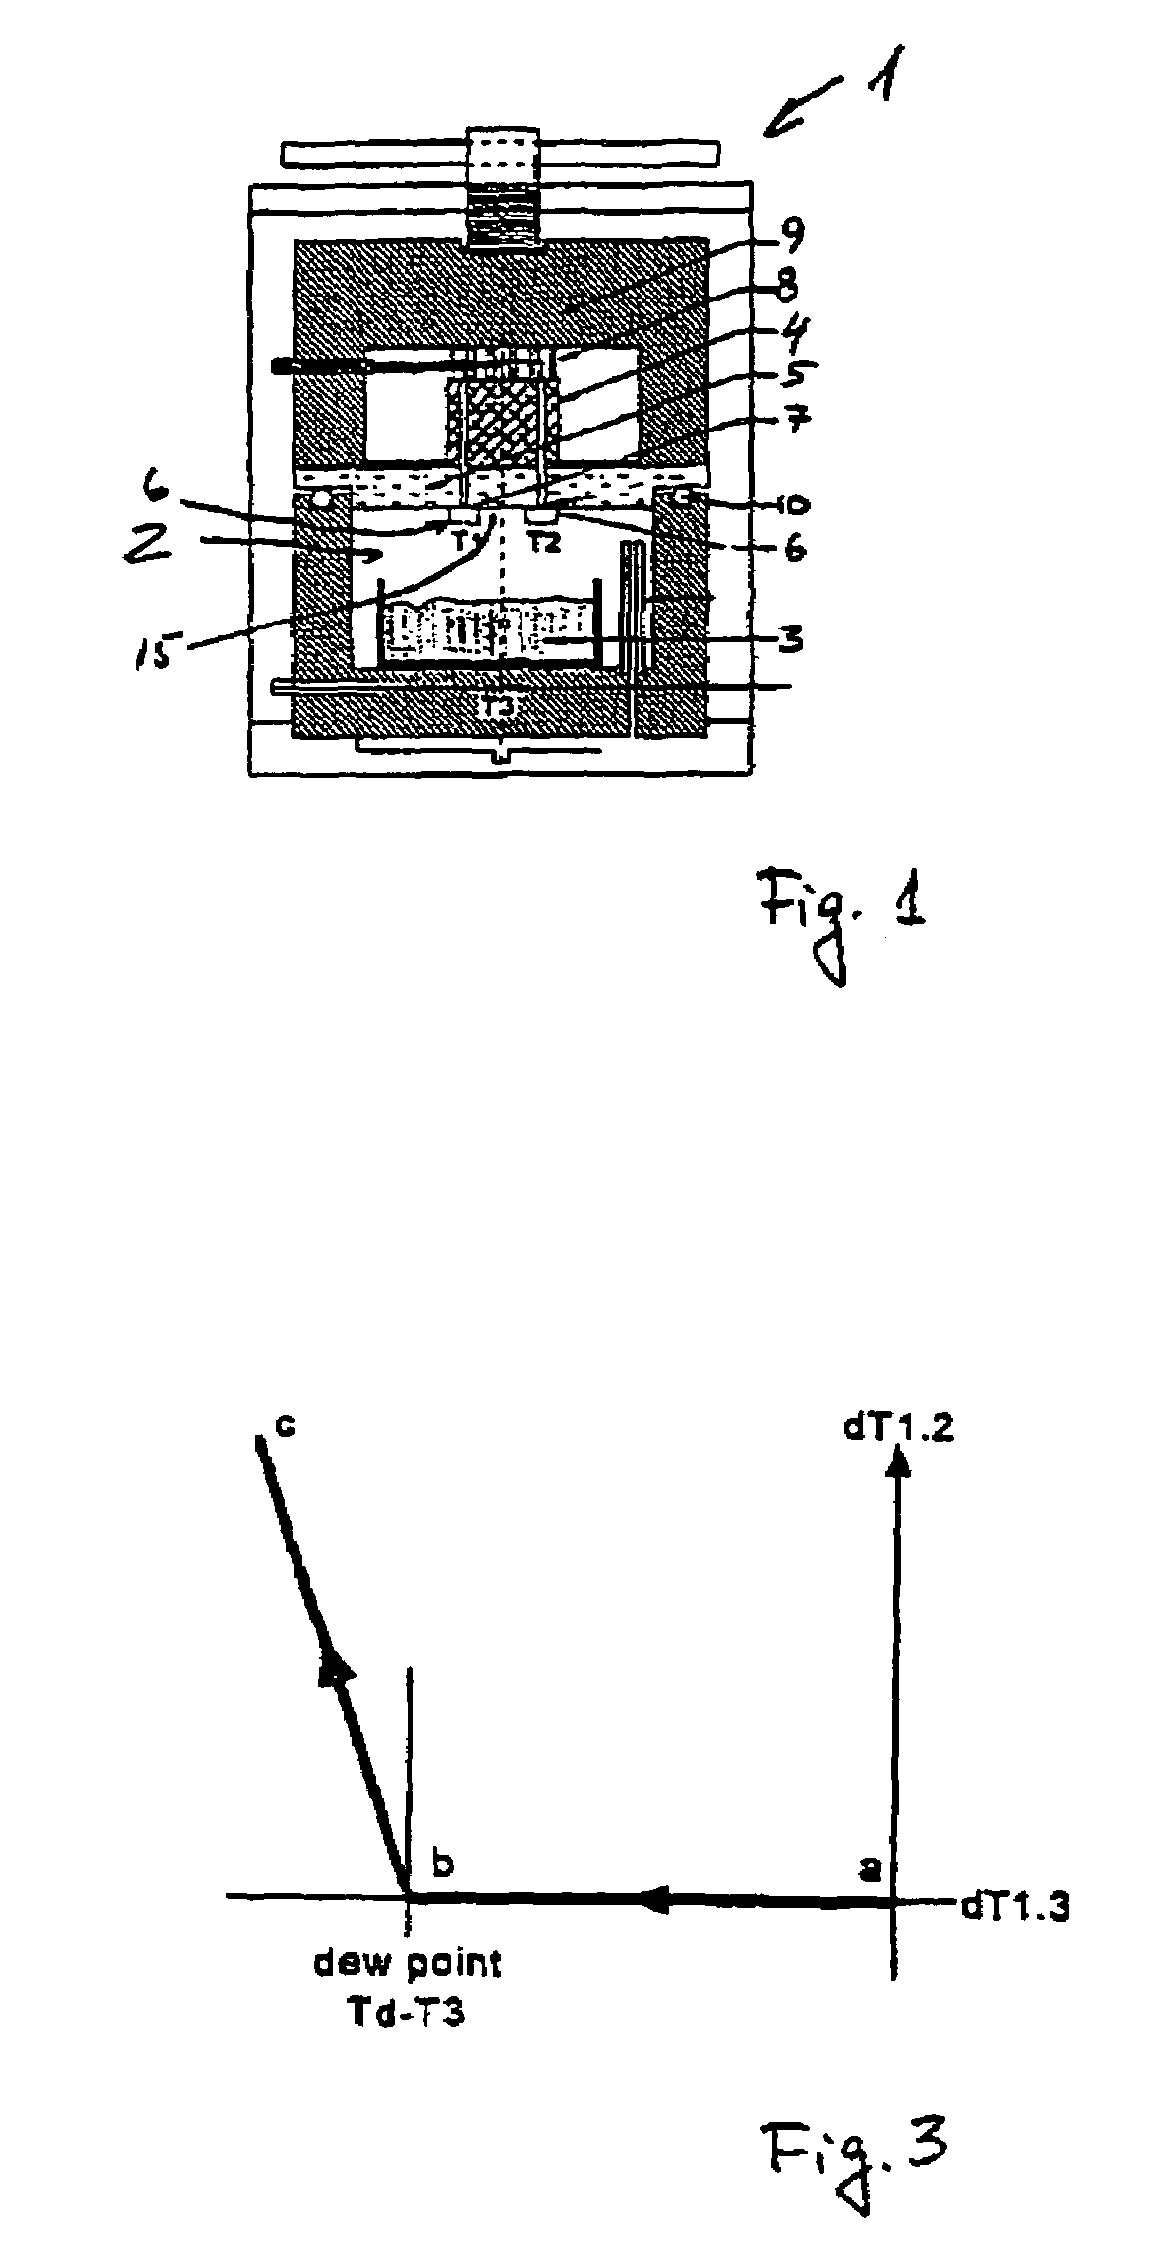 Dynamic dew point analysis method and a device for determining the dew point temperature and relative humidity